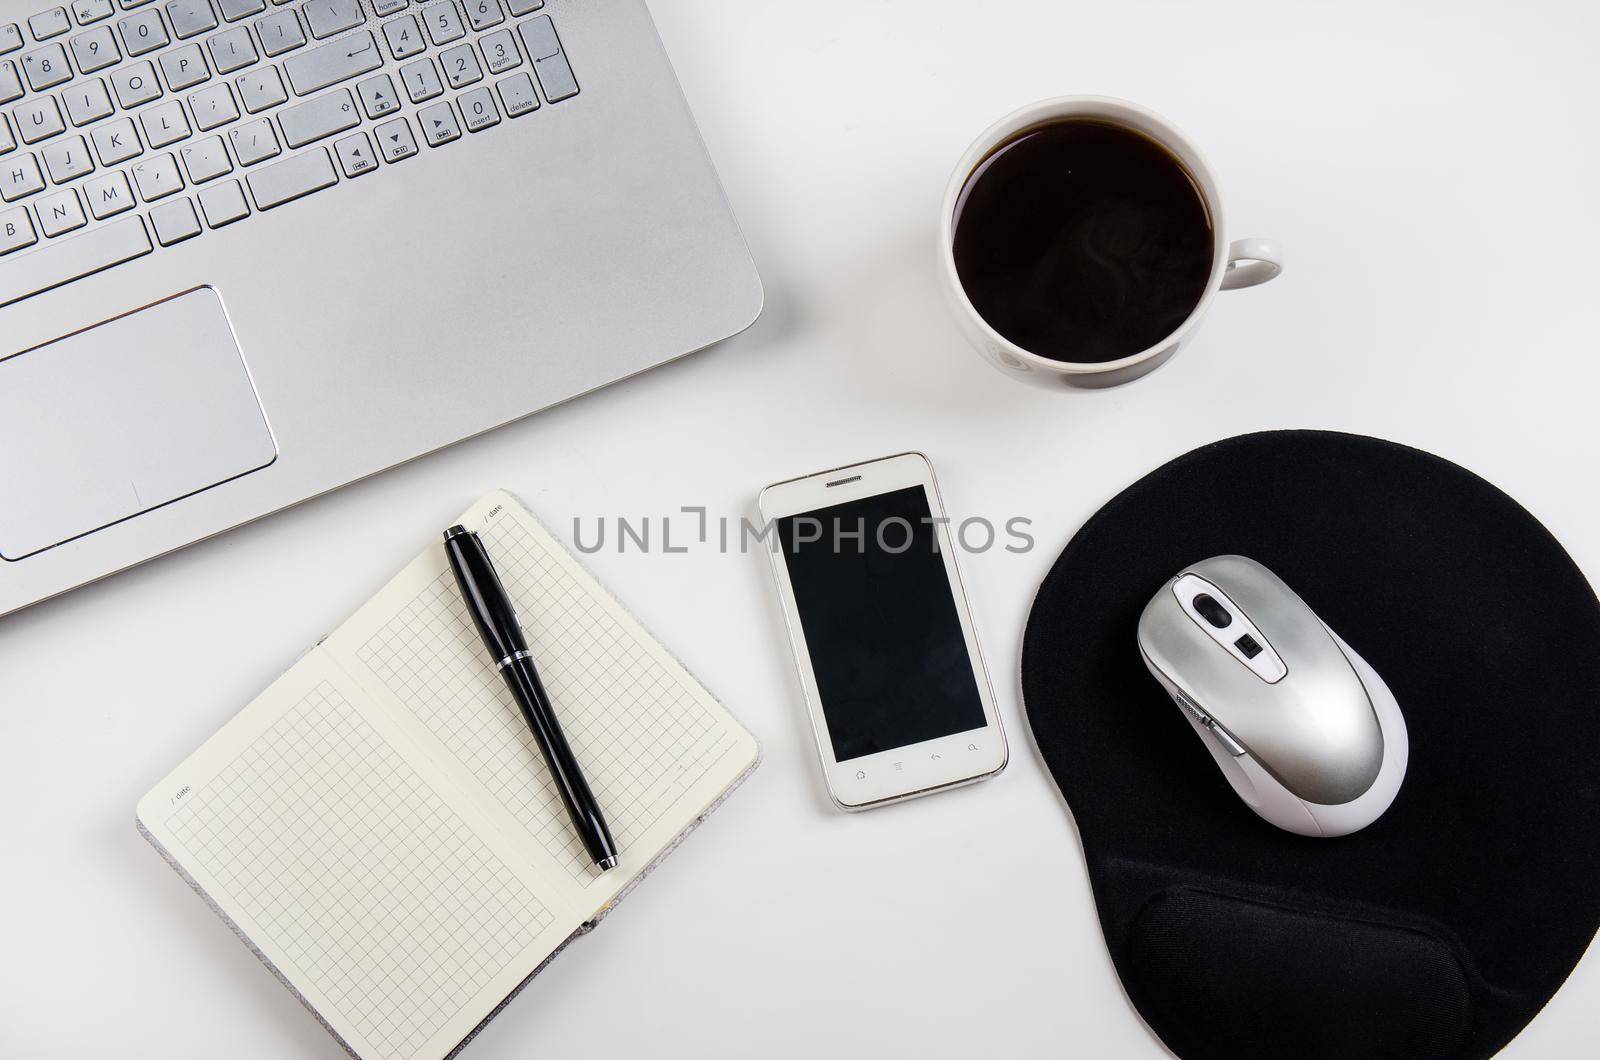 Cup of coffee and laptop on white table. Stock image.